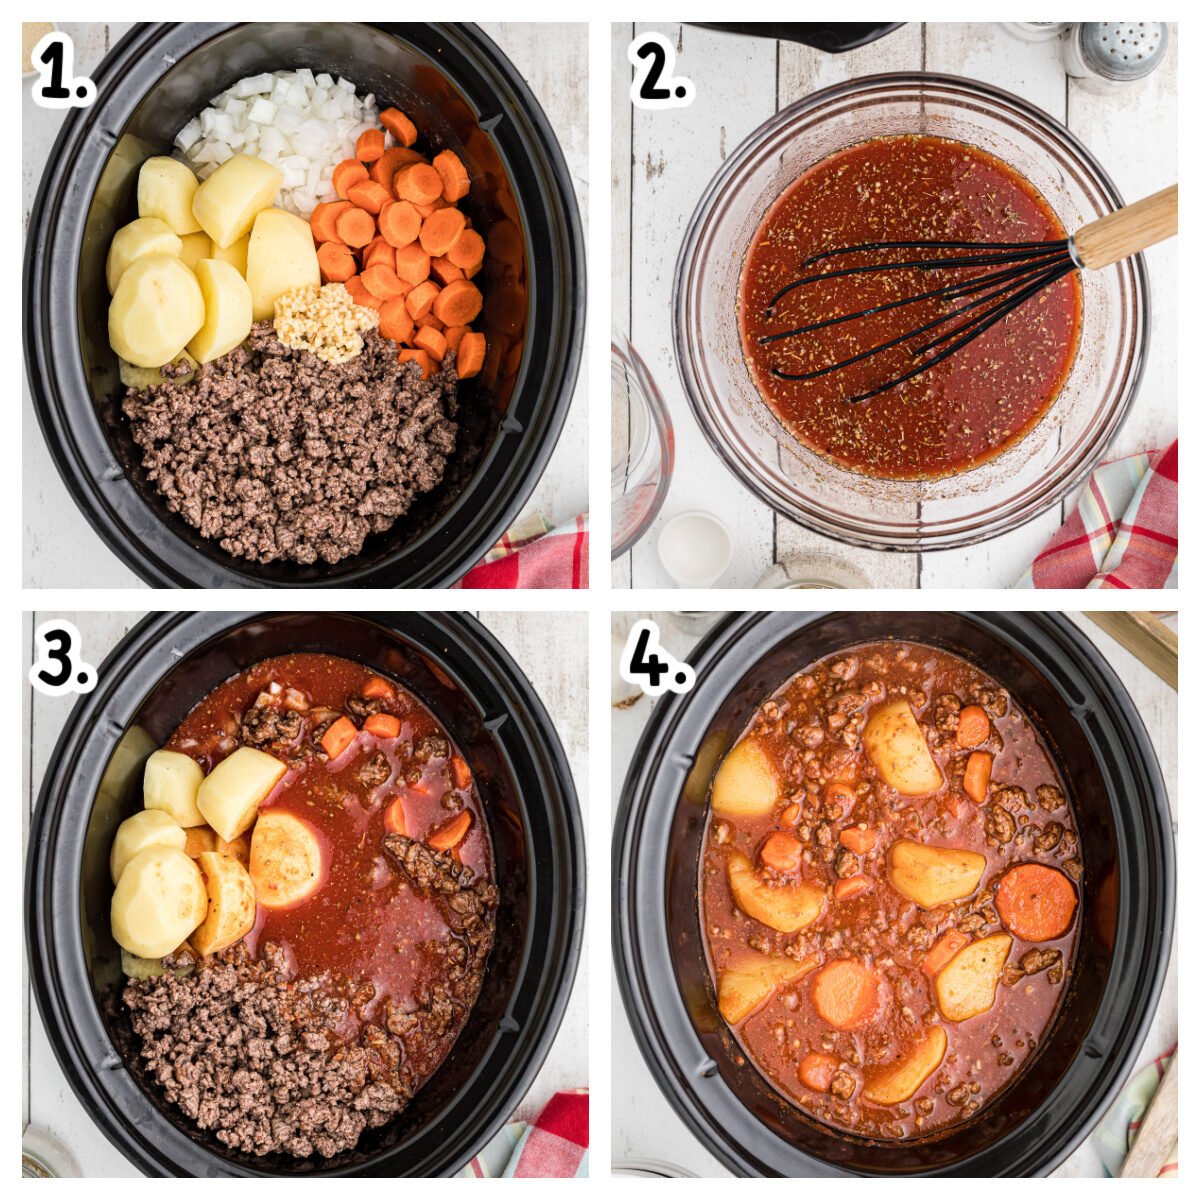 four images of how to assemble poor man's stew in a crockpot.